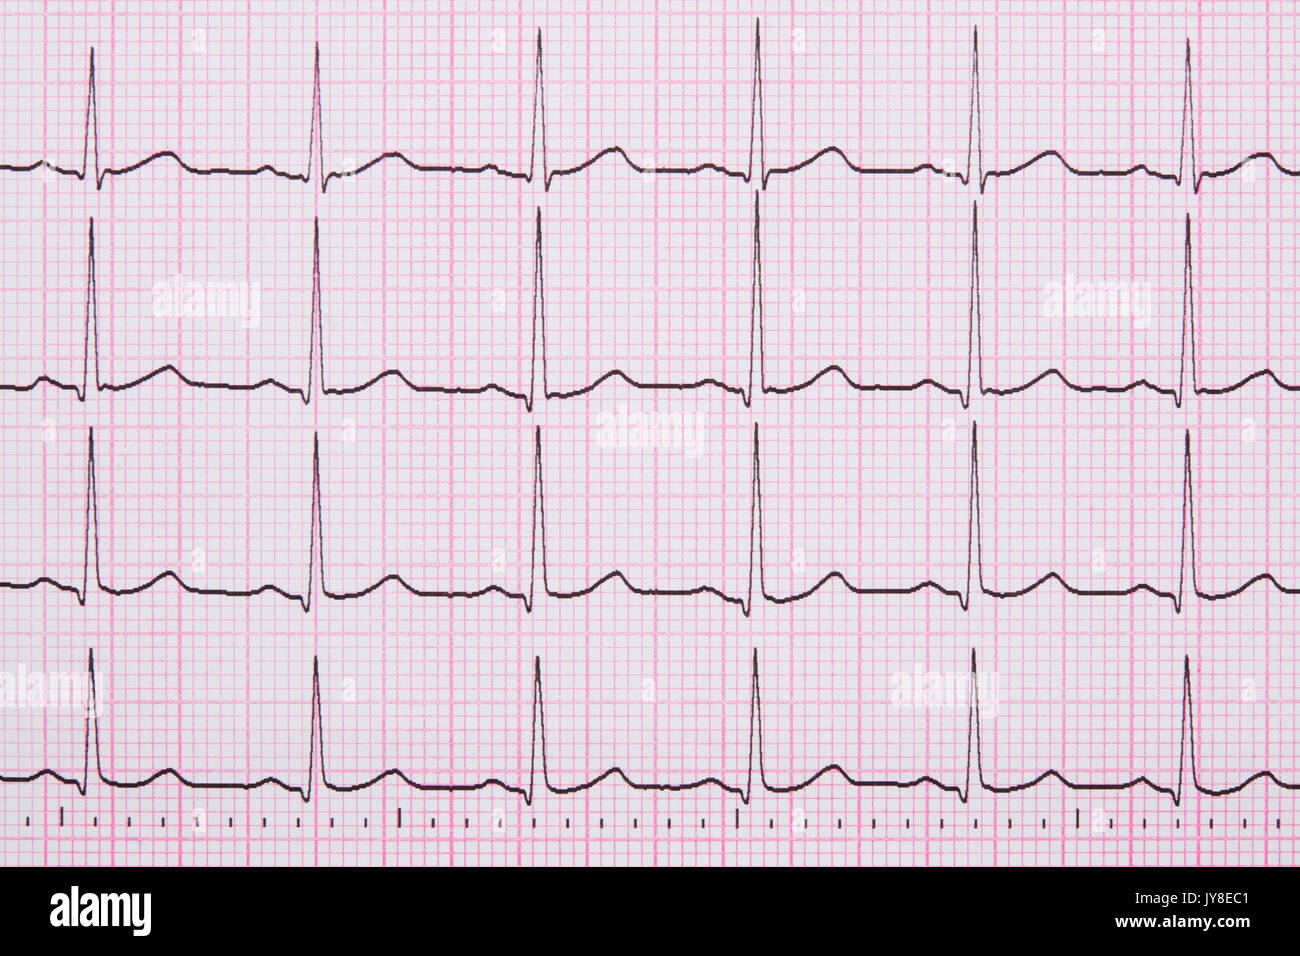 Close up of a Electrocardiograph also known as a EKG or ECG graph Stock Photo